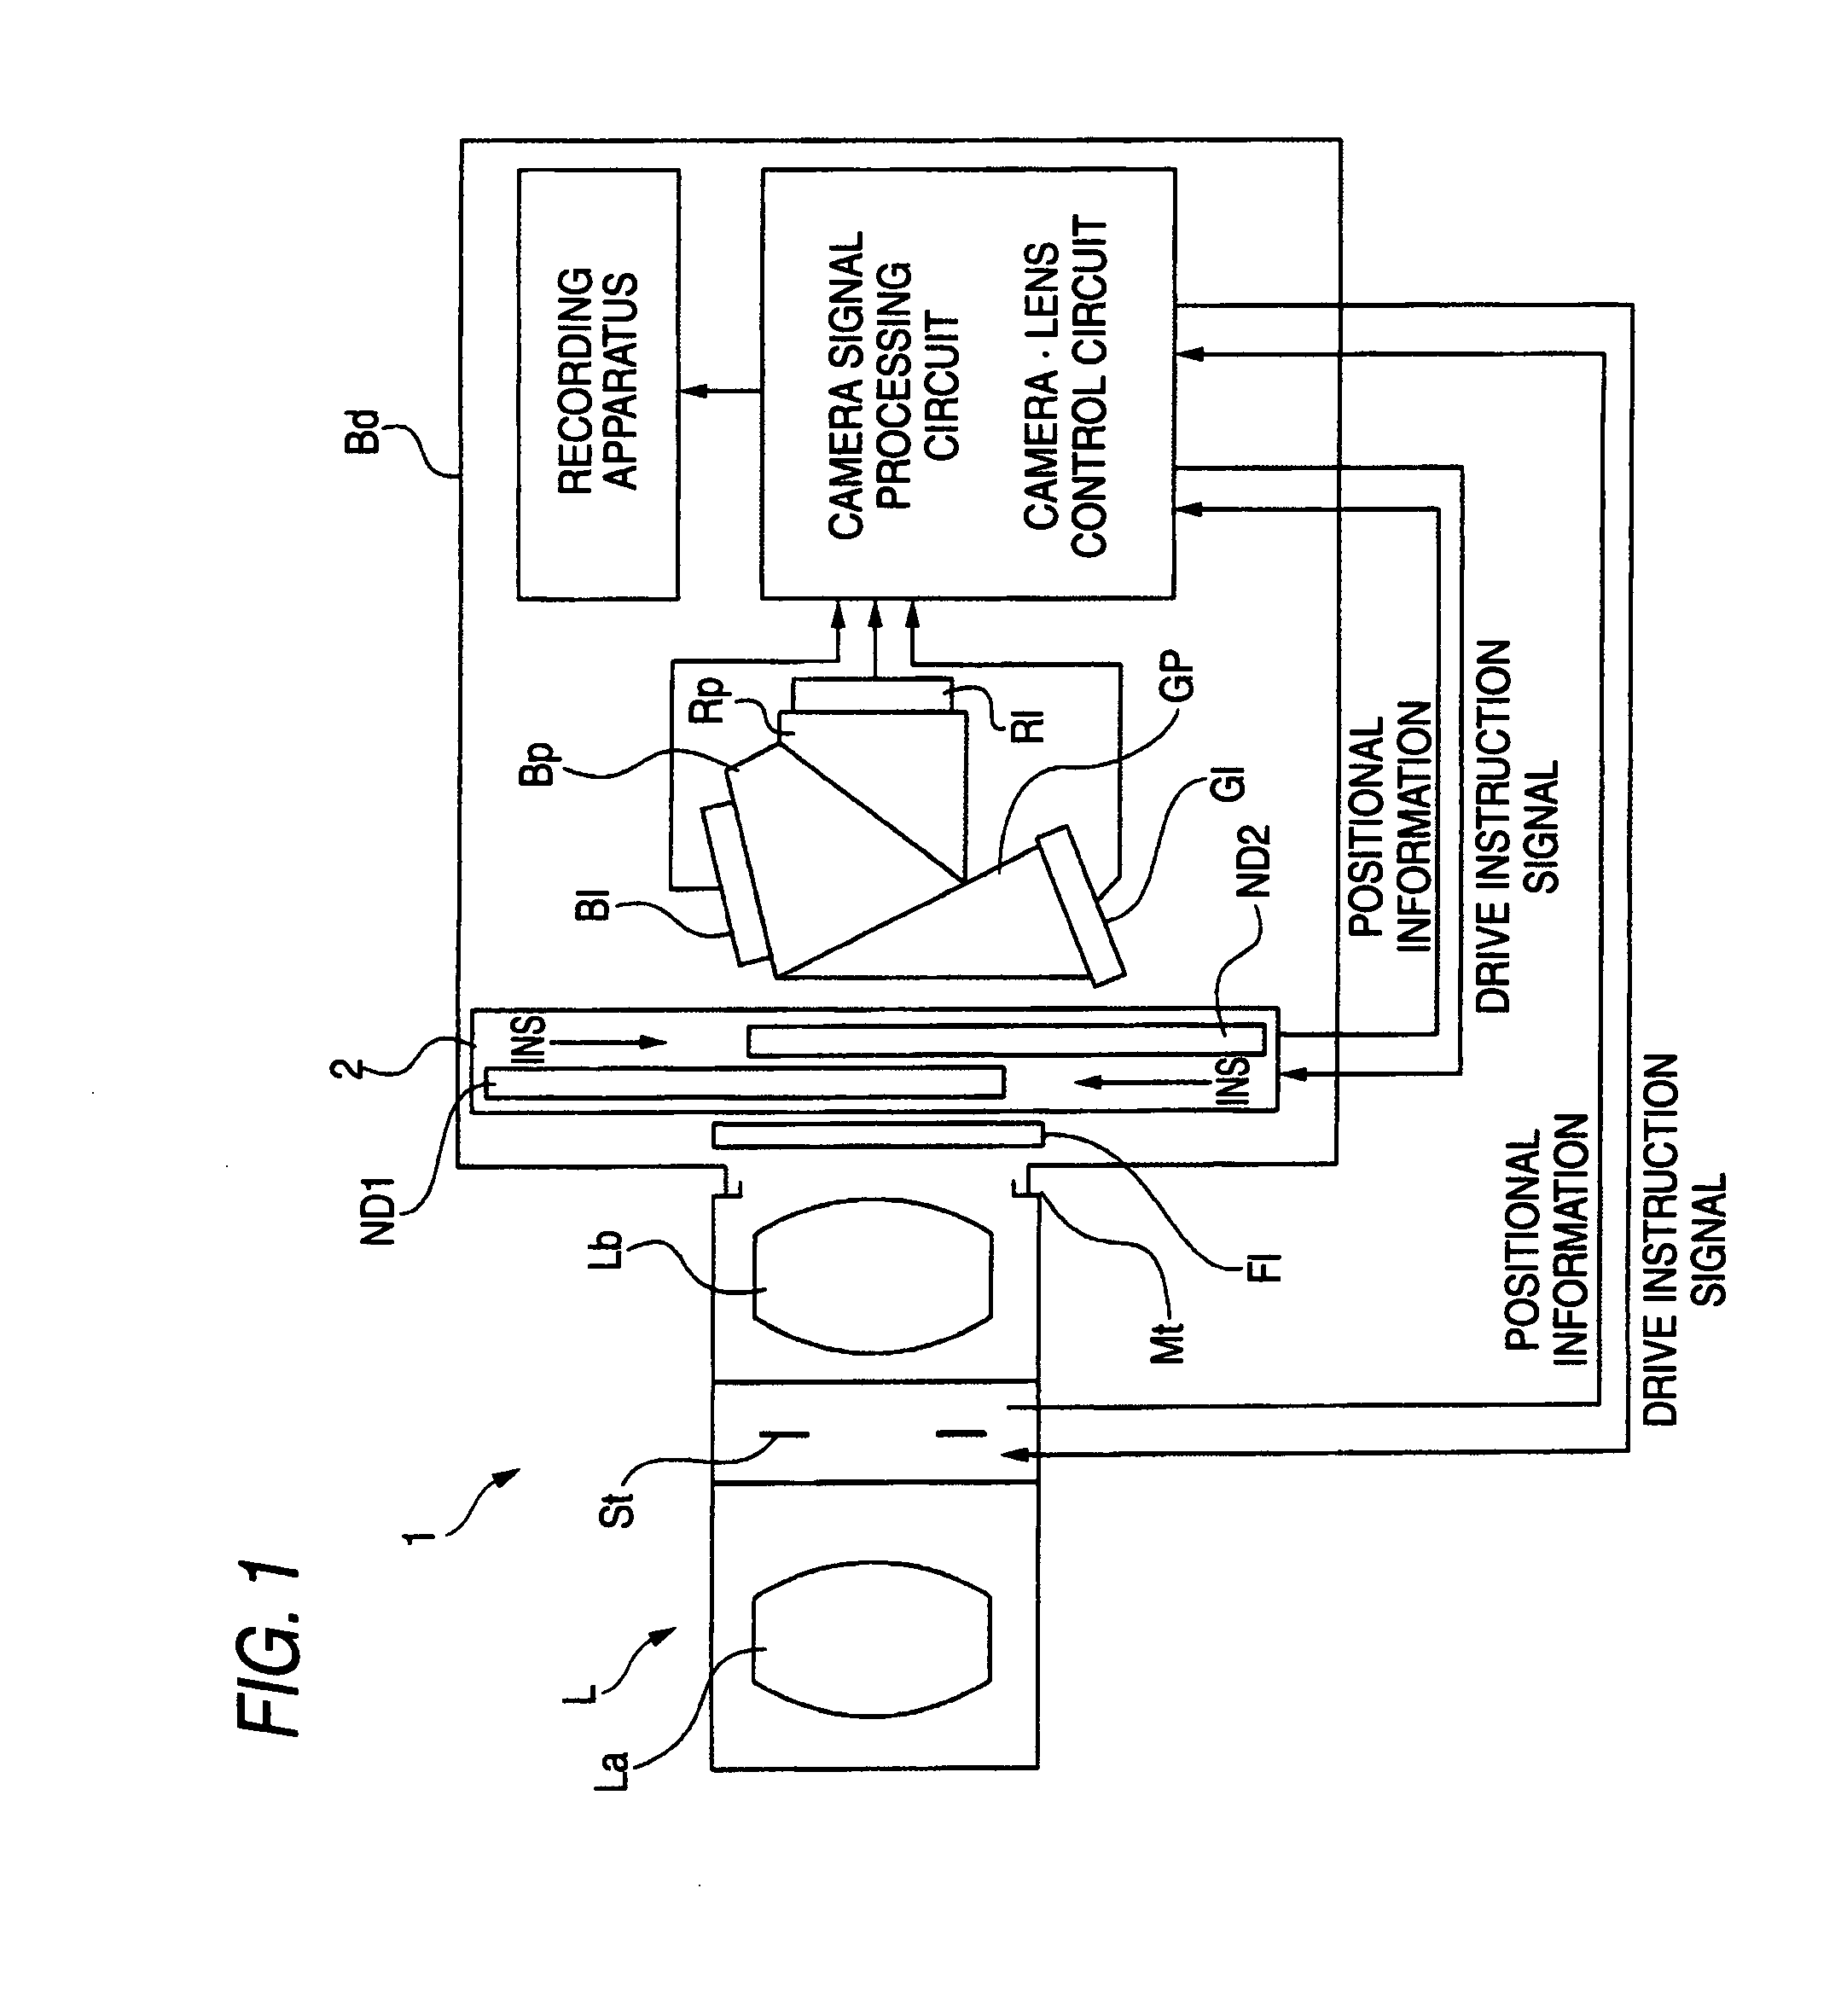 Light amount adjuster and imaging apparatus